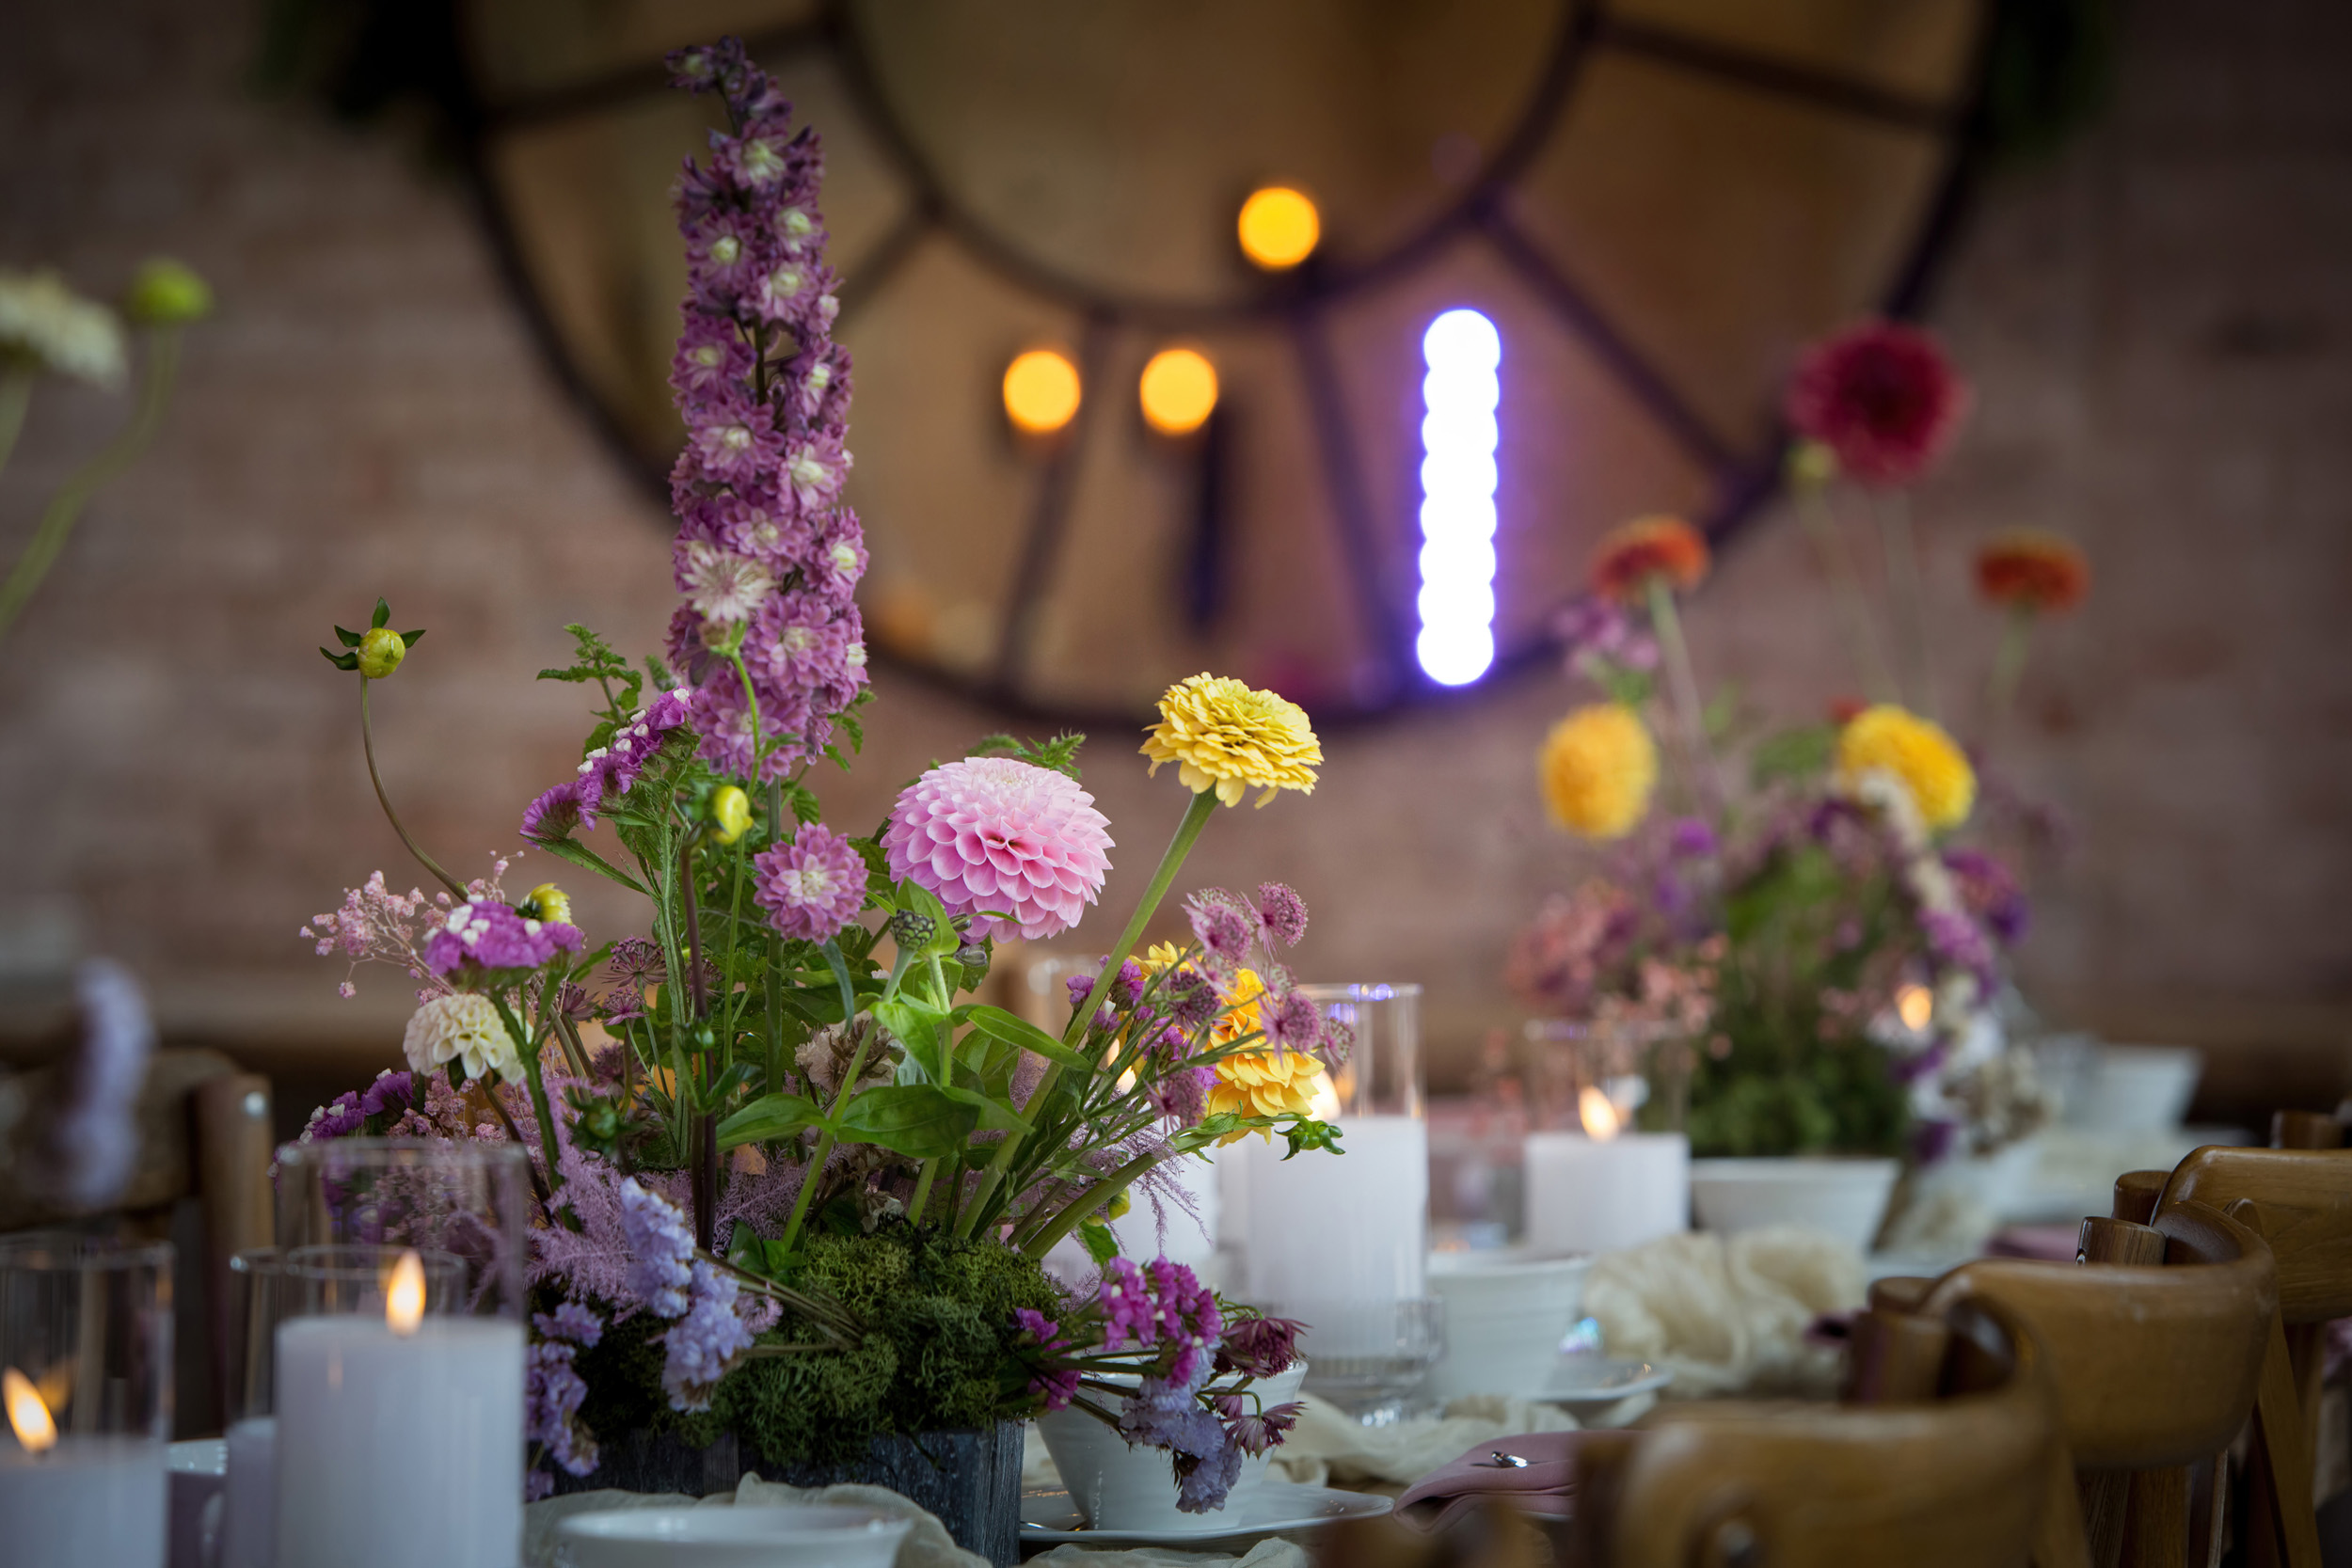 A close up of a floral table arrangement in a yellow and purple colour scheme using dahlias, marigolds and delphiniums